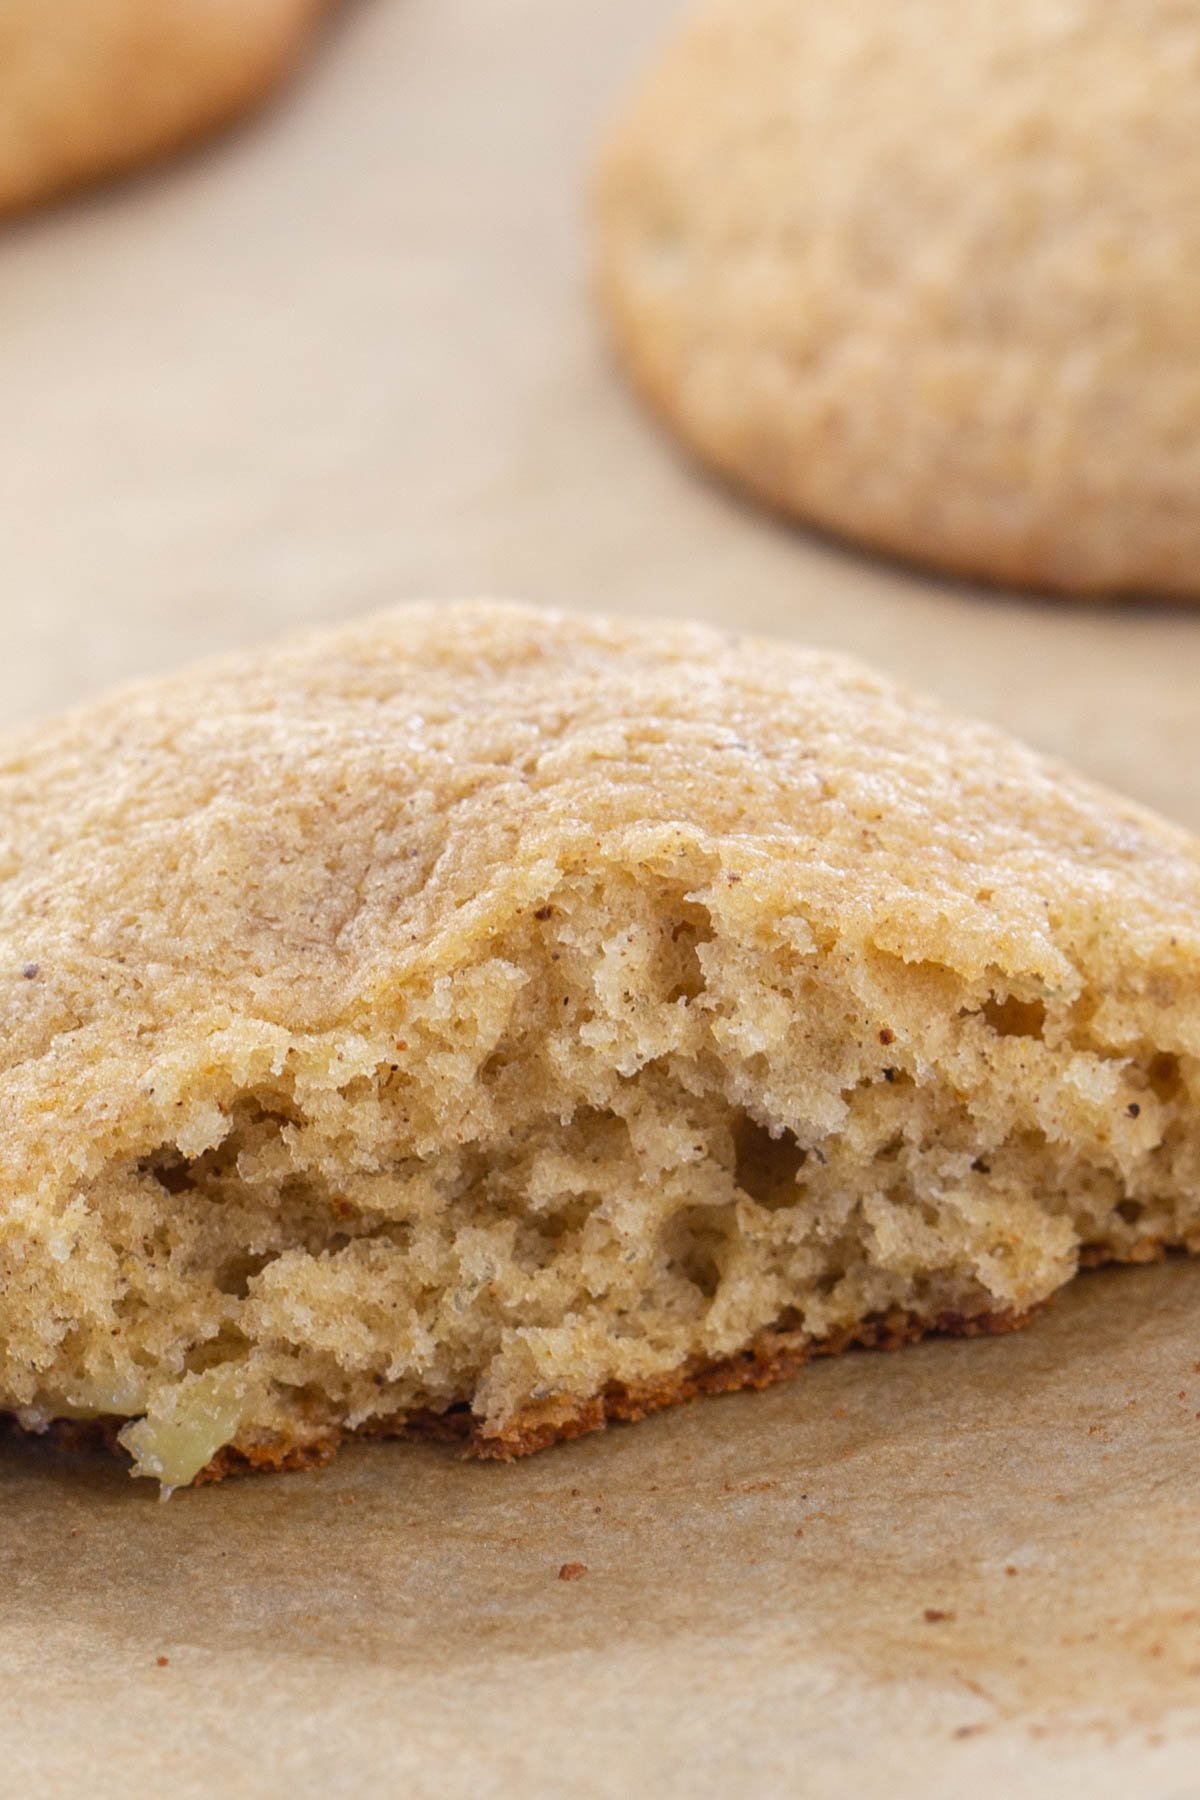 Soft banana cookie with bite out of it on brown parchment paper.